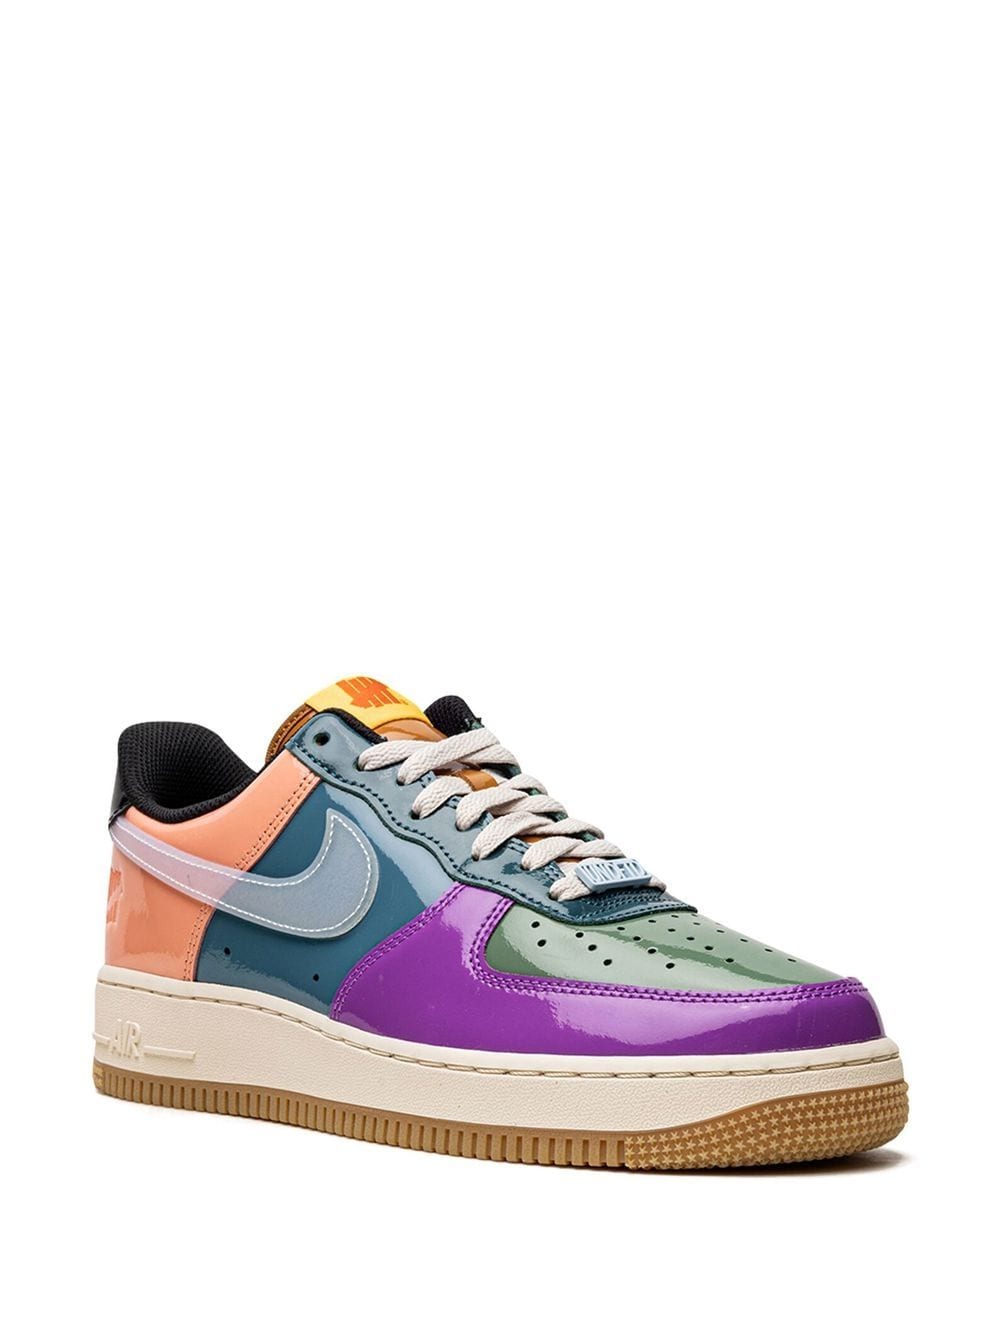 Image 2 of Nike x Undefeated Air Force 1 Low "Multi-Patent" sneakers